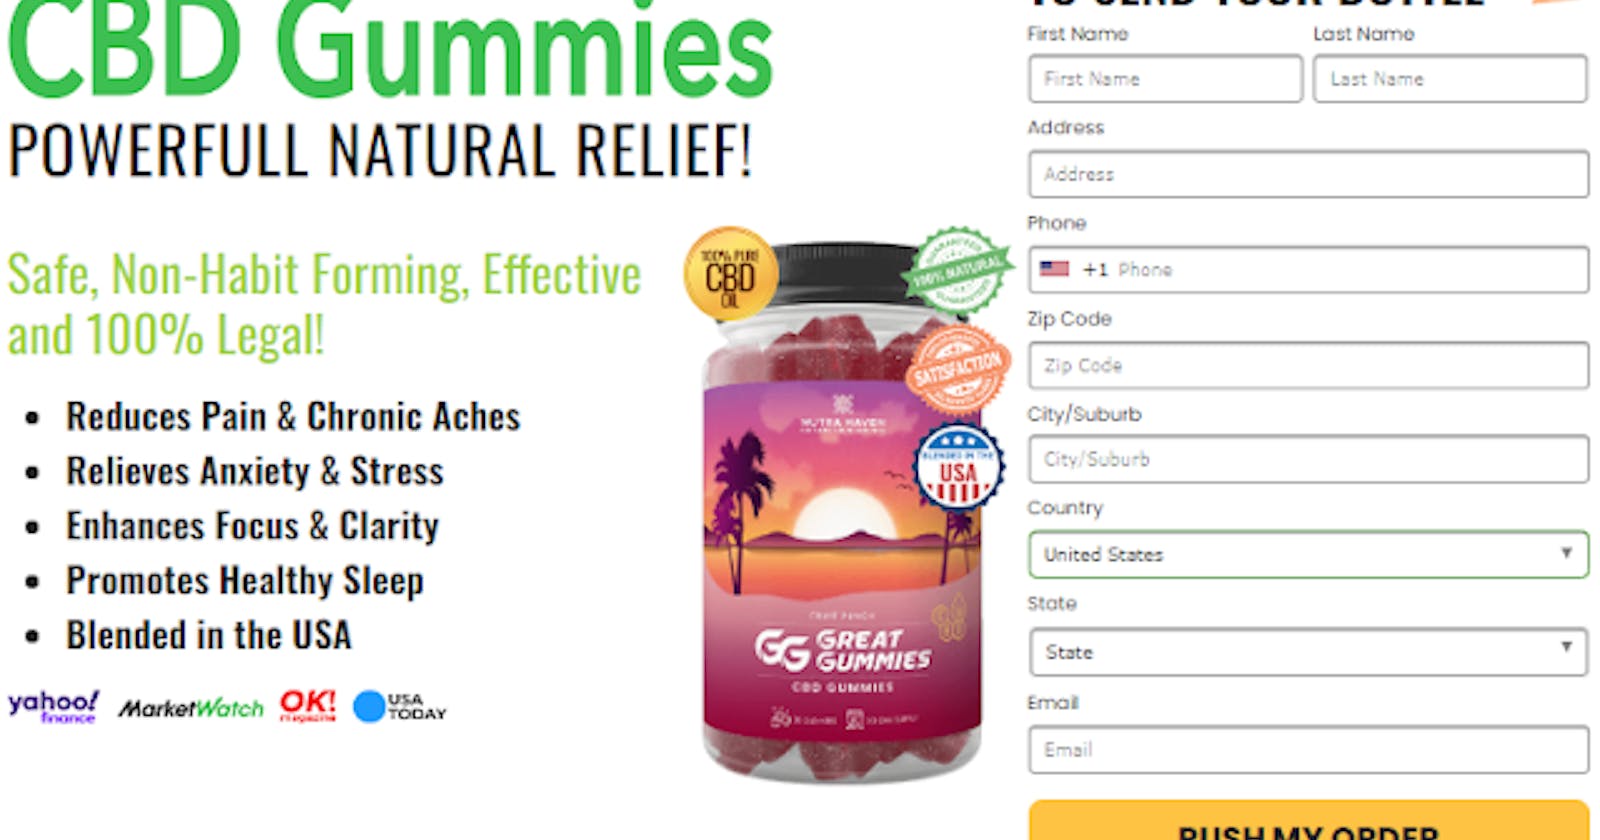 Nutra Haven Great CBD Gummies (Scam or Legit) Relieve Anxiety & Stress!